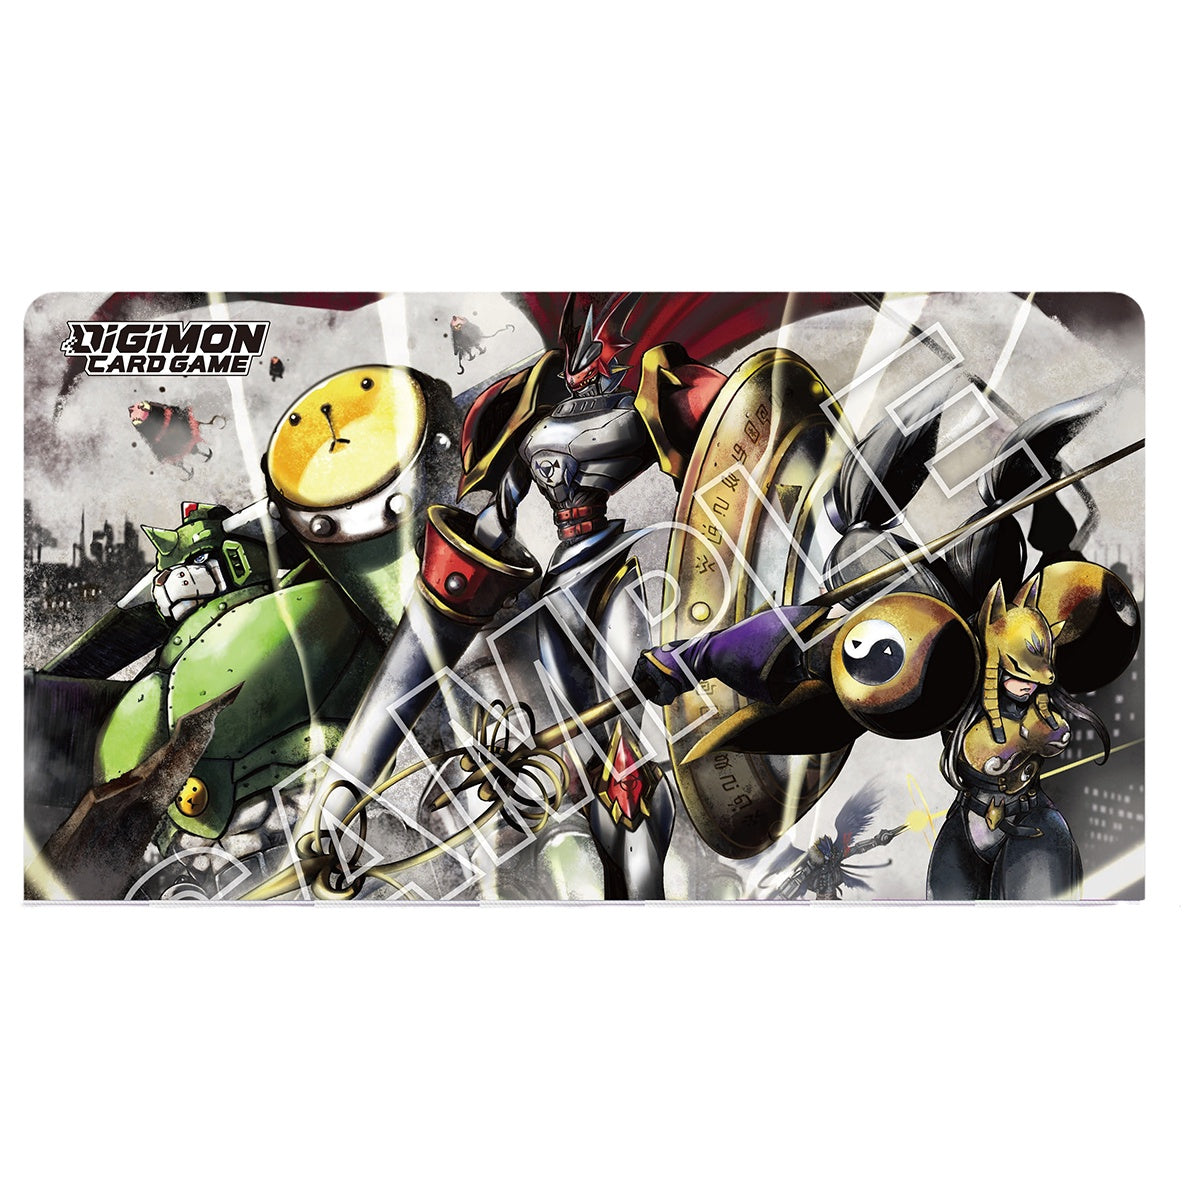 Digimon Card Games Playmat and Card Set 1 Digimon Tamers